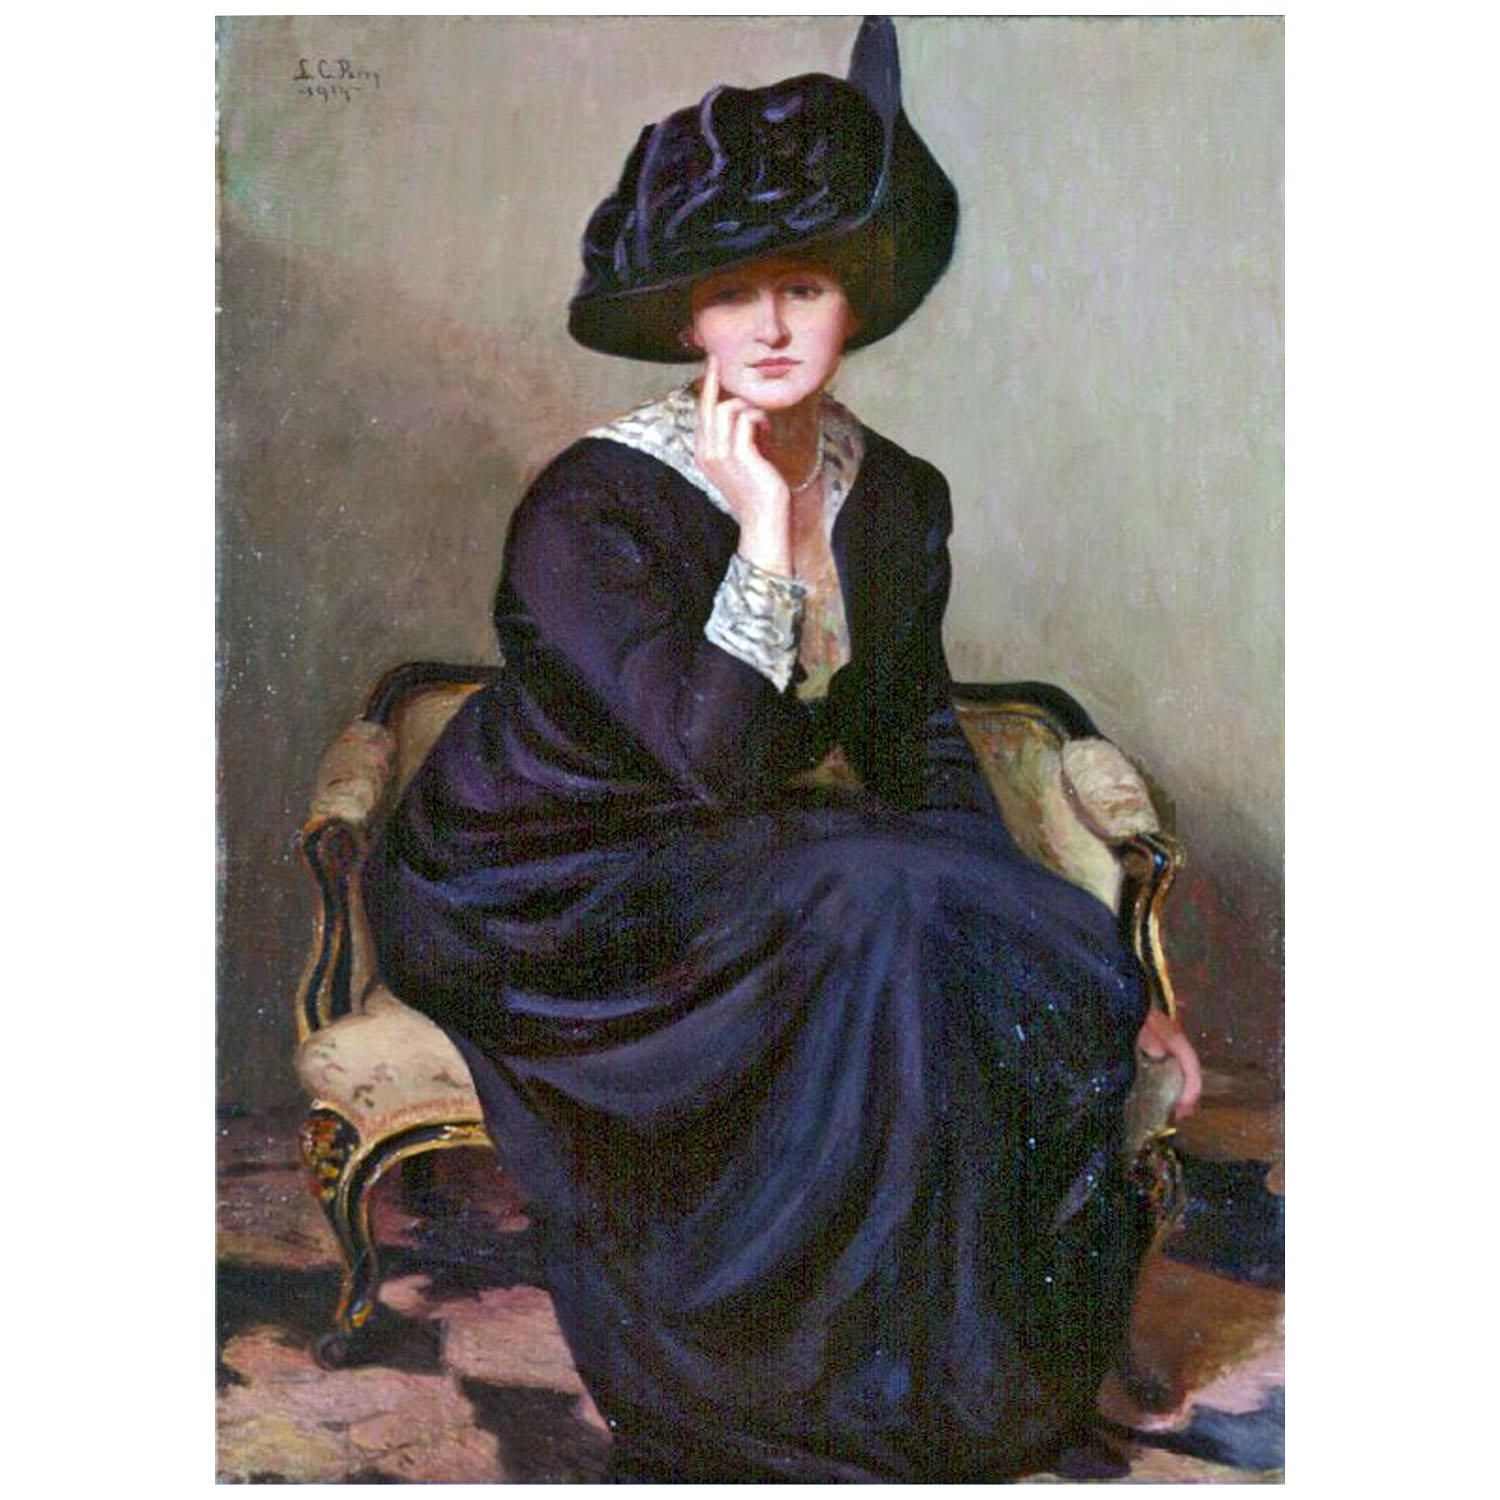 Lilla Cabot Perry. The Black Hat. 1914